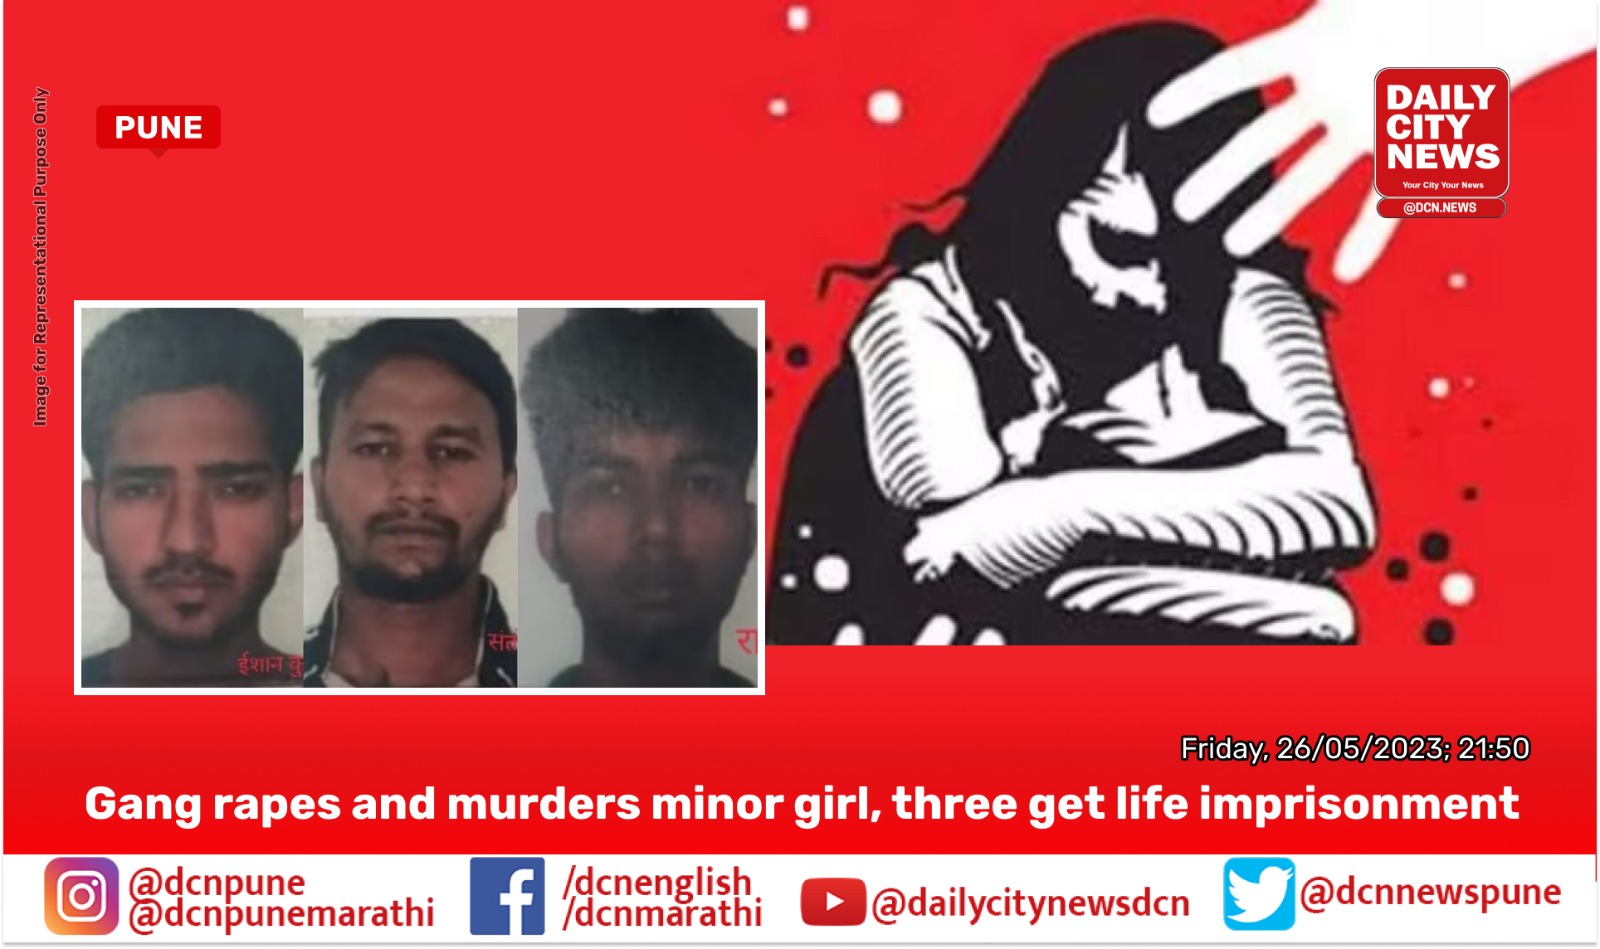 Gang rapes and murders minor girl, three get life imprisonment